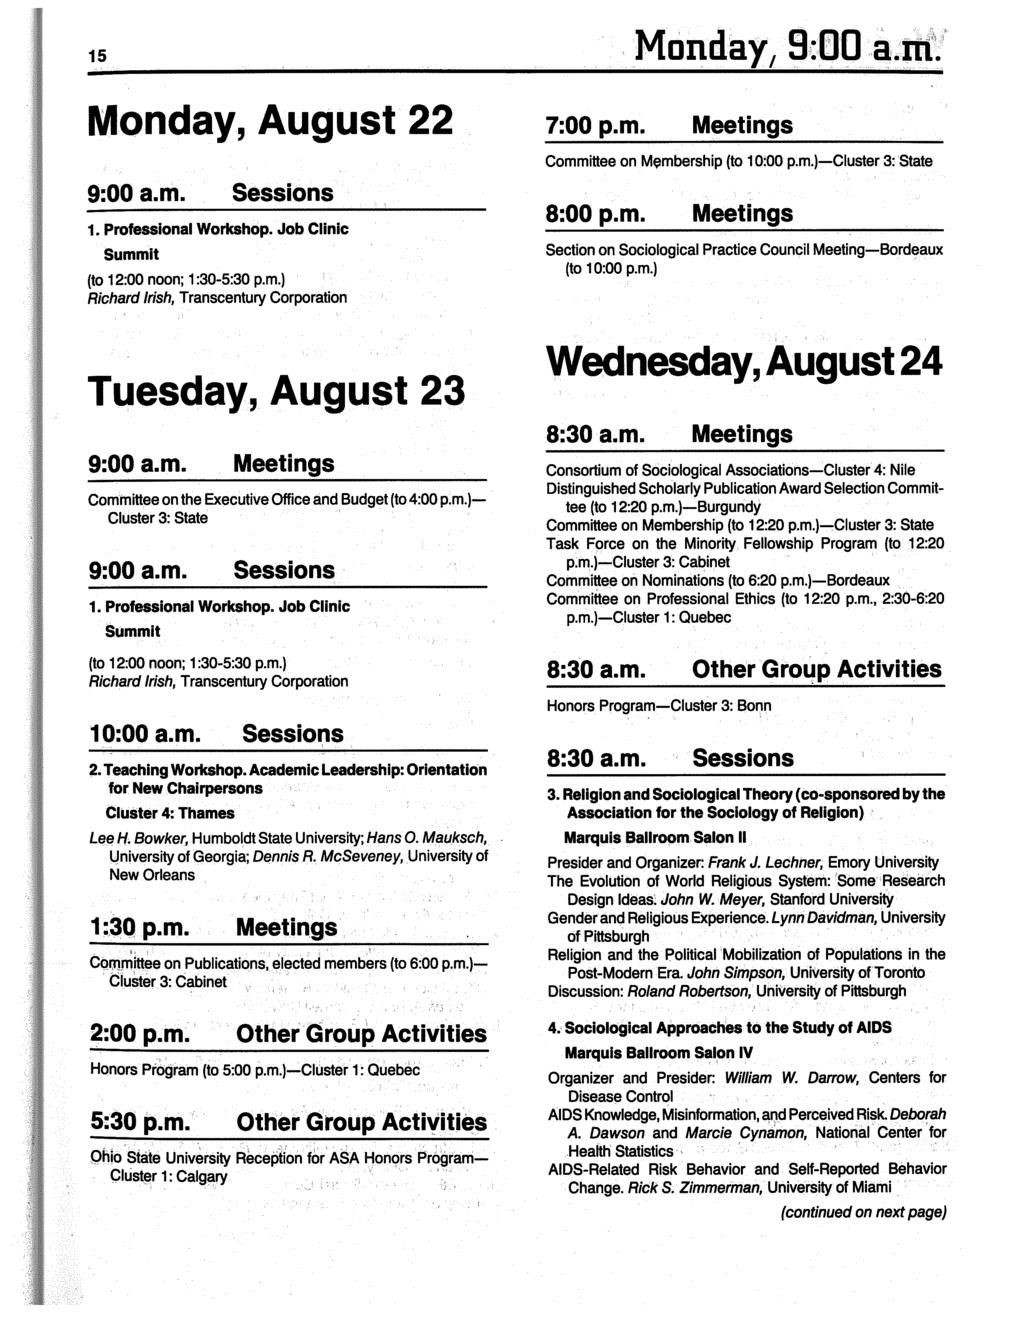 15 Monday, August 22 9:00a.m. Sessions 1. Professional Workshop. Job Clinic Summit (to 12:00 noon; 1 :30-5:30 p.m.) Richard Irish, Transcentury Corporation Tuesday,August23 9:00a.m. Meetings Committee on the Executive Office and Budget (to 4:00p.